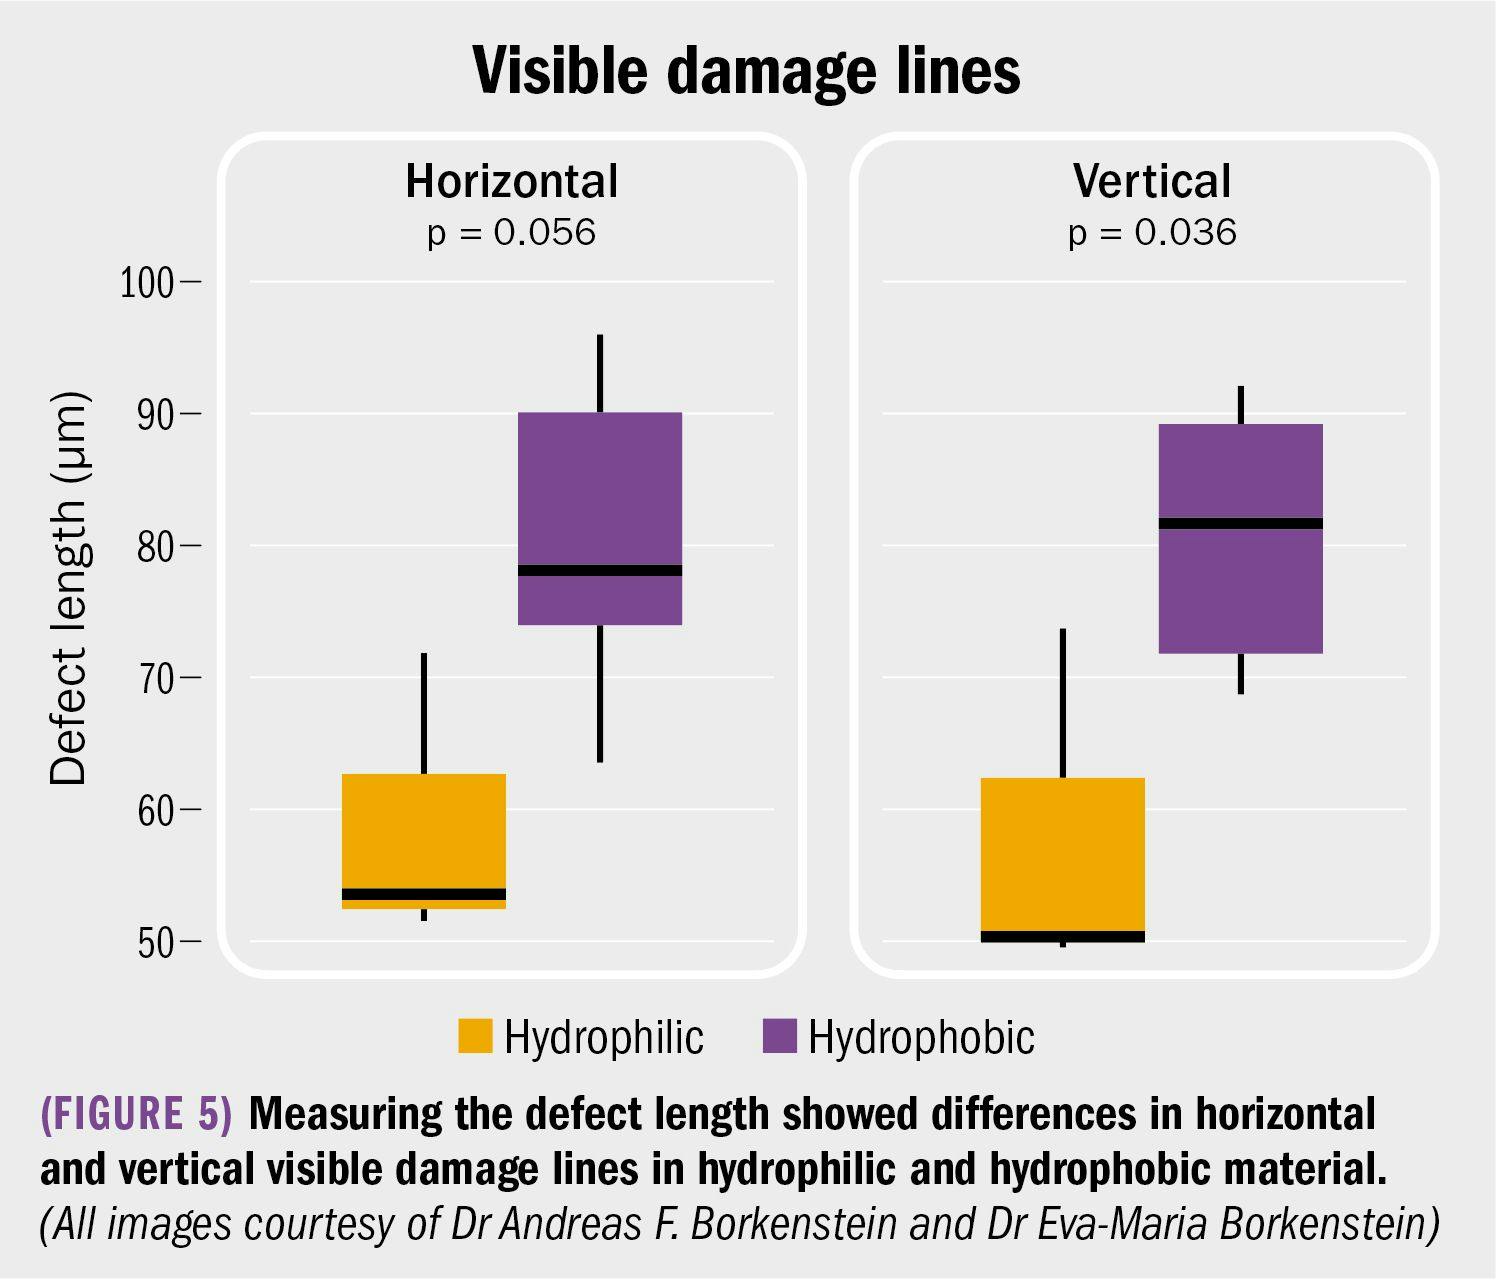 chart showing visible damage lines in hydrophilic and hydrophobic material